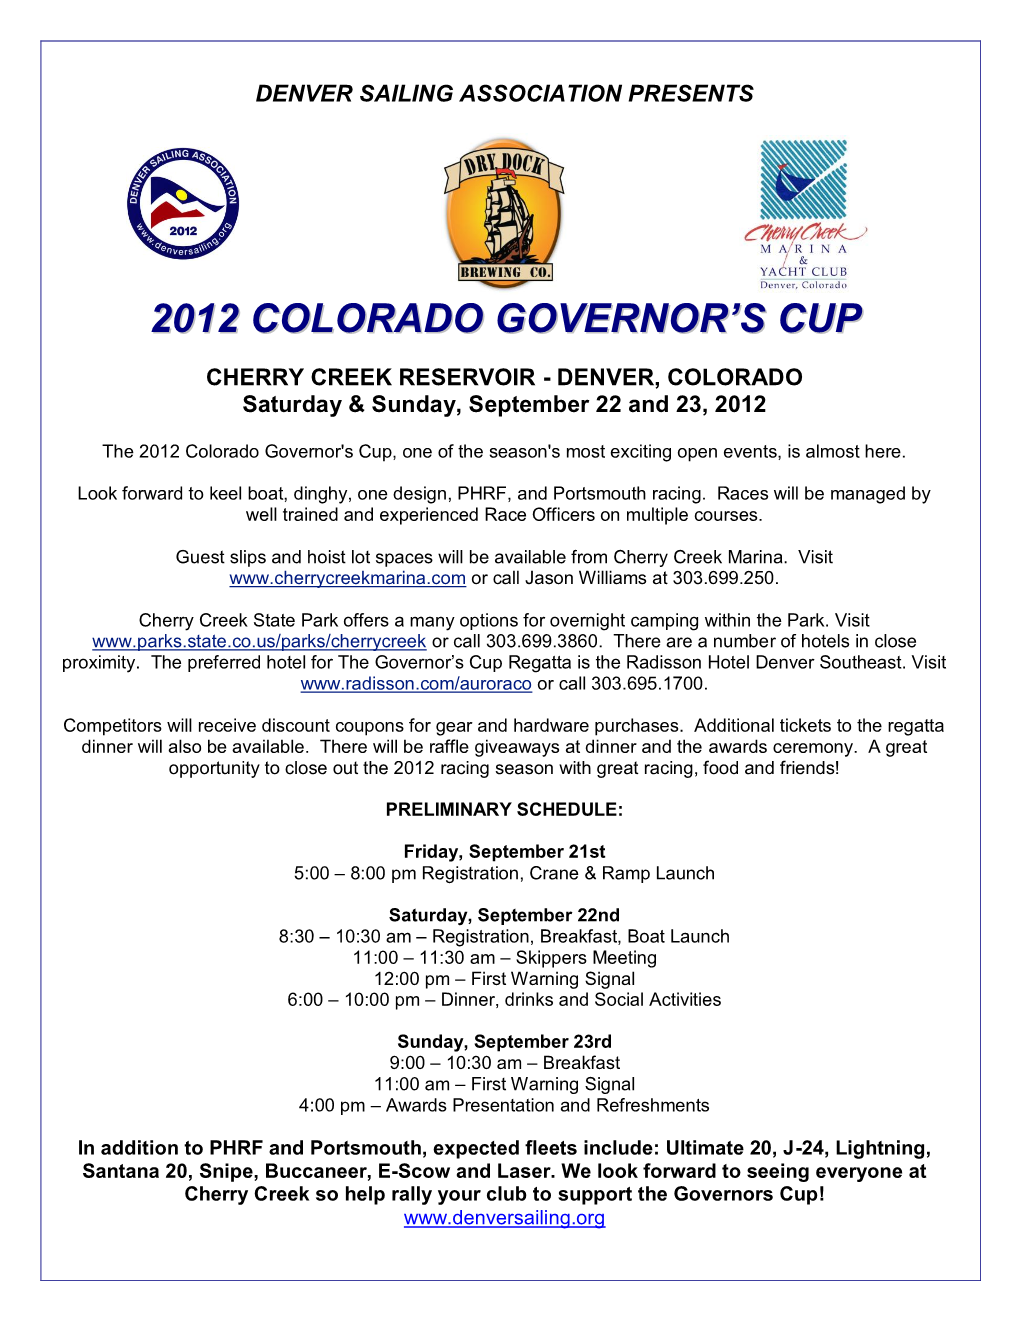 2012 Colorado Governor's Cup, One of the Season's Most Exciting Open Events, Is Almost Here